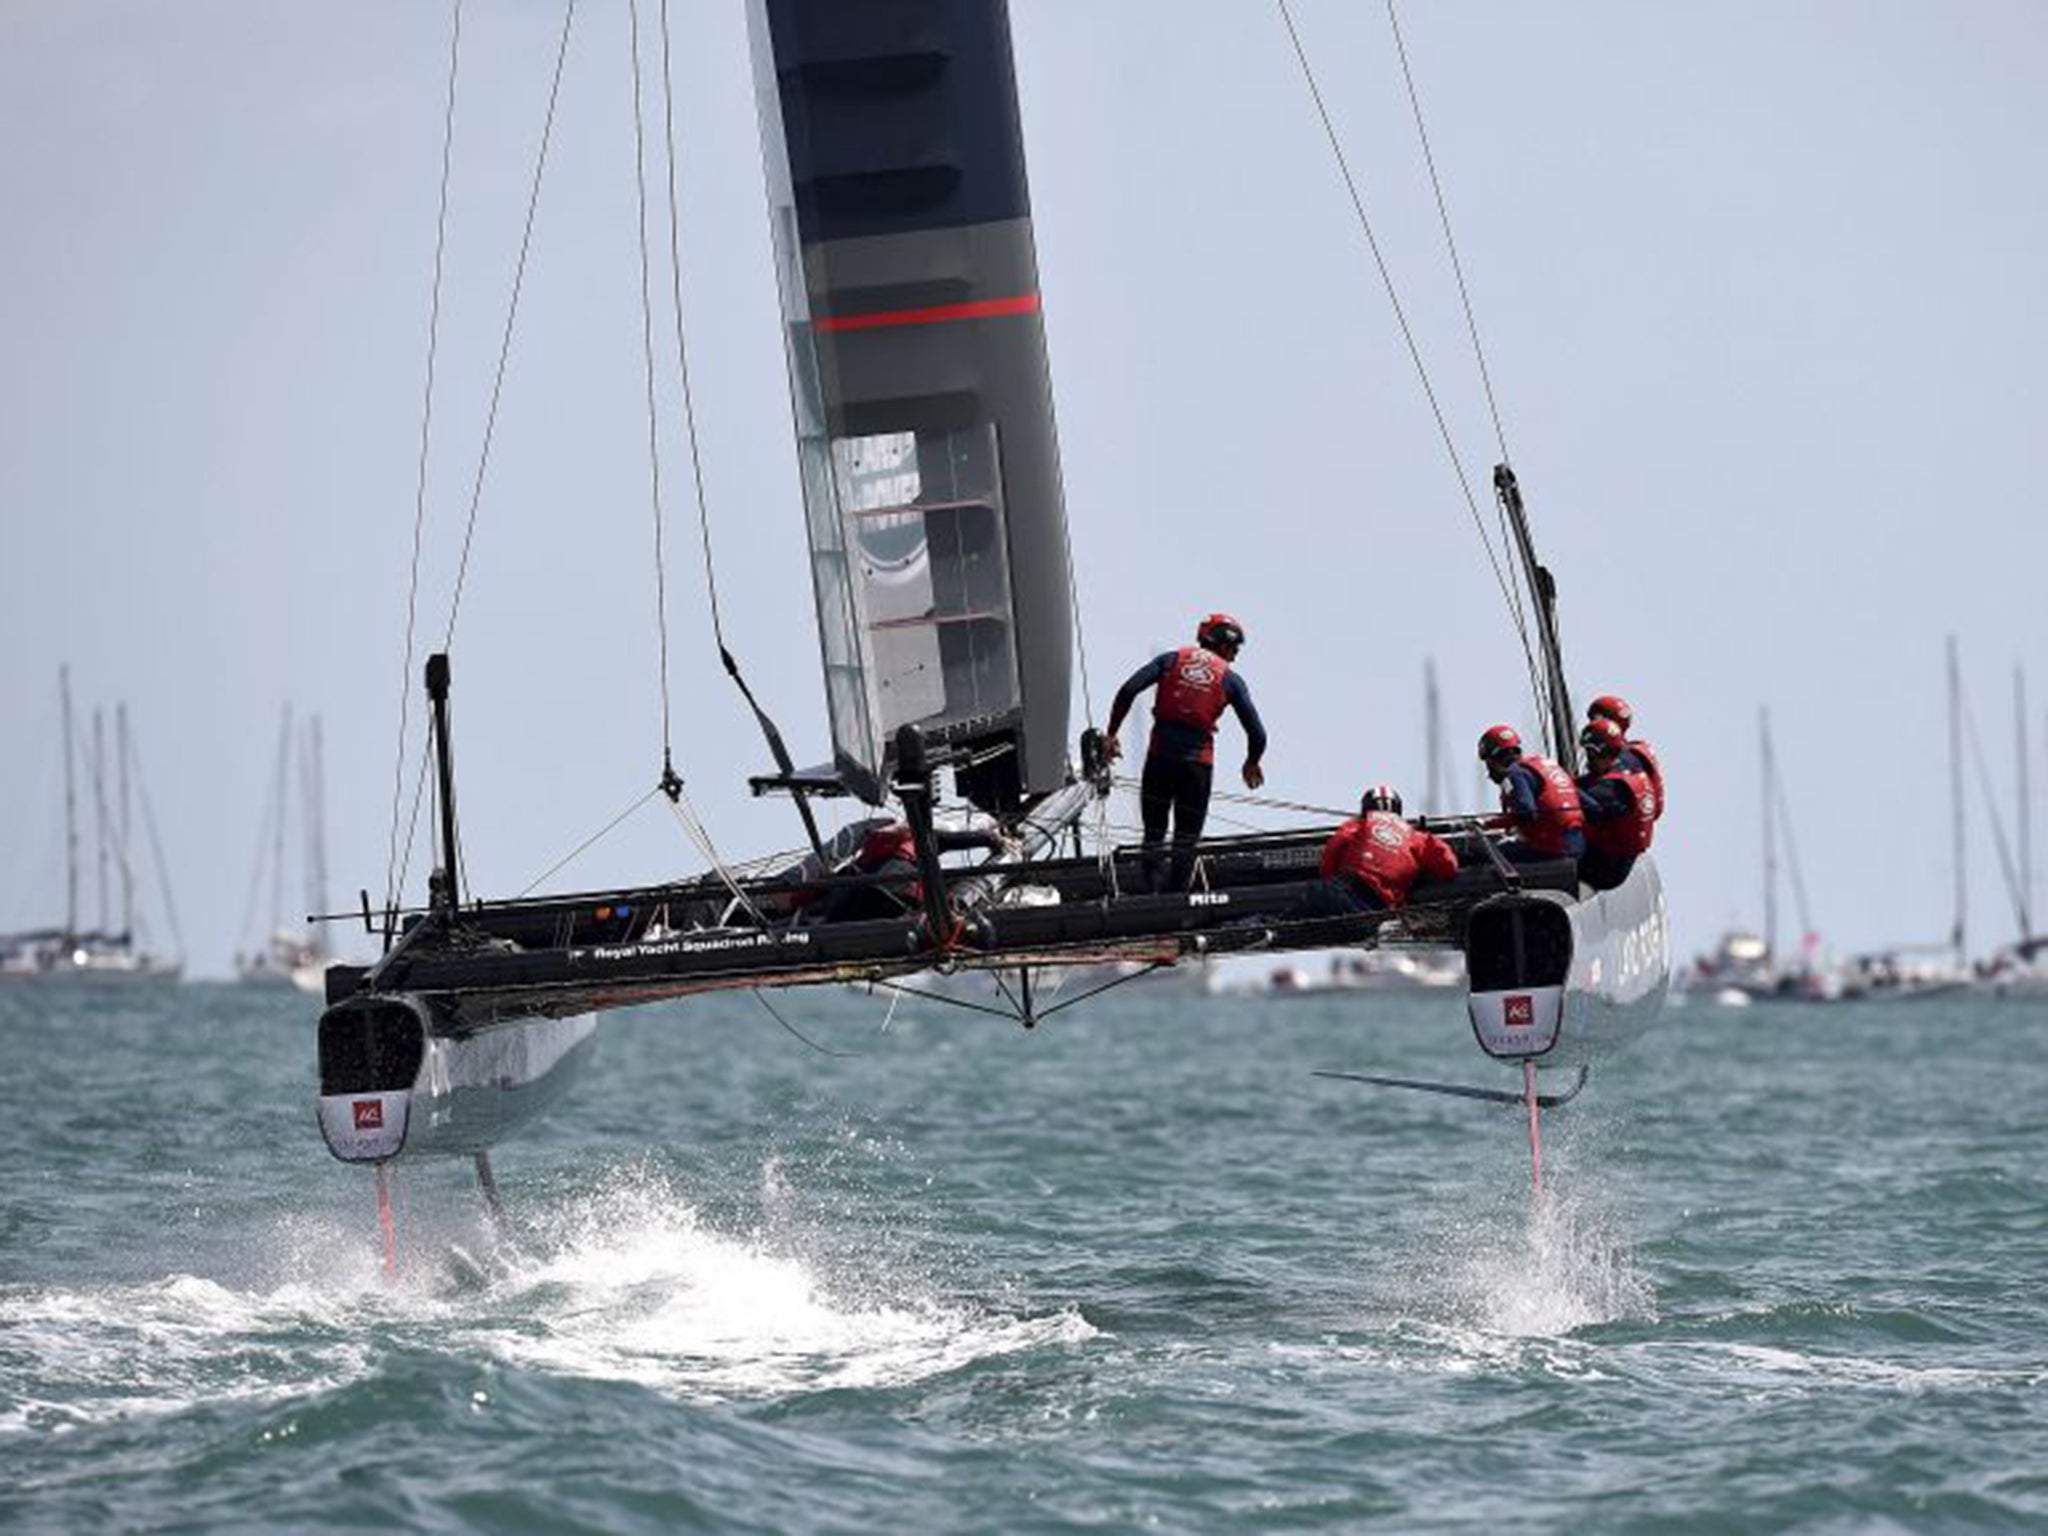 Sir Ben Ainslie skippered the Land Rover BAR catamaran in Saturday’s first race in Southsea for the America’s Cup